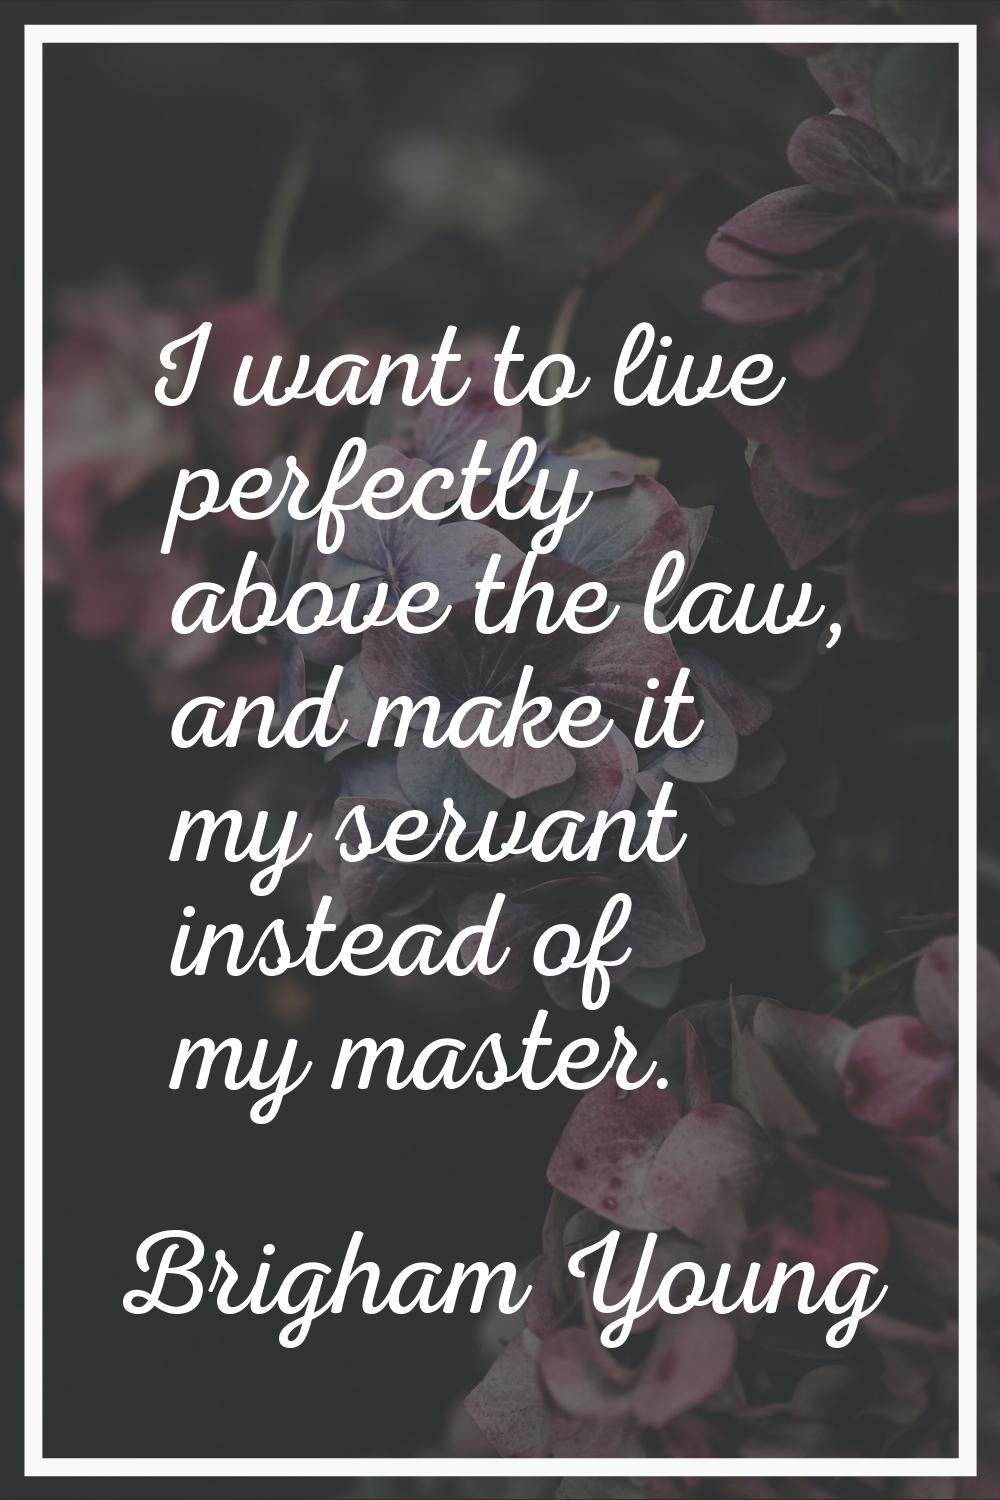 I want to live perfectly above the law, and make it my servant instead of my master.